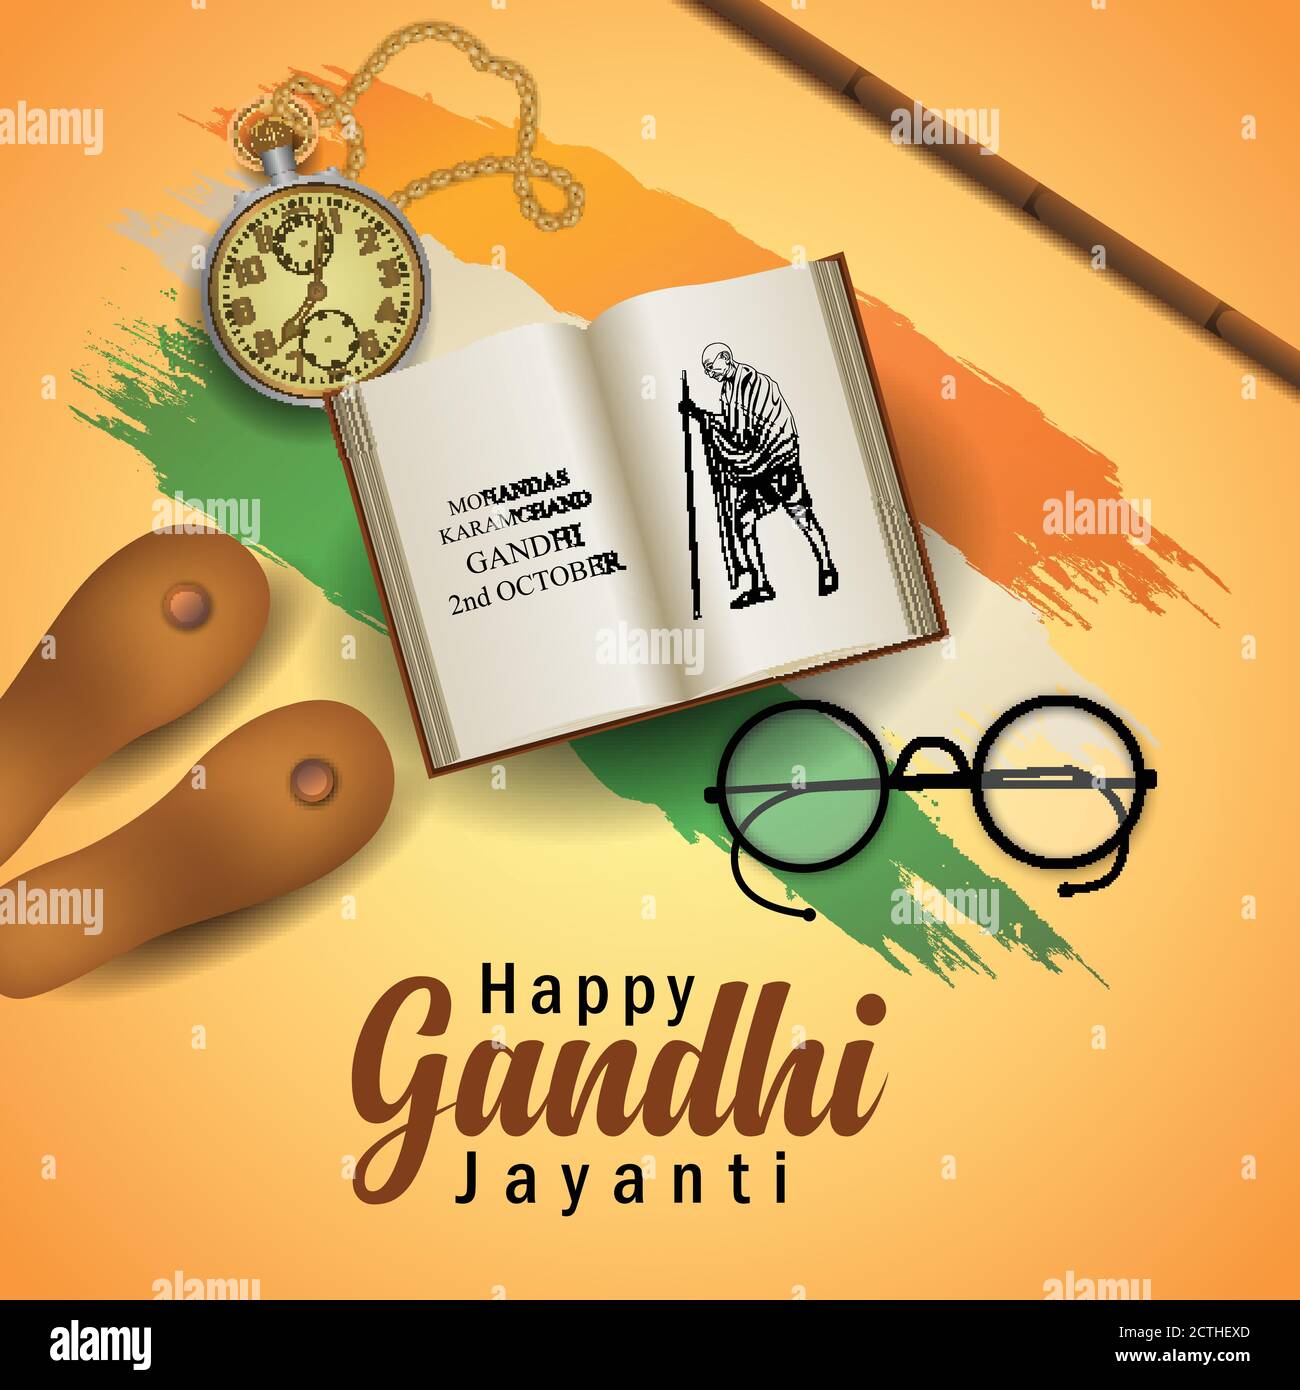 illustration of Happy Gandhi Jayanti, 2nd October with old ...